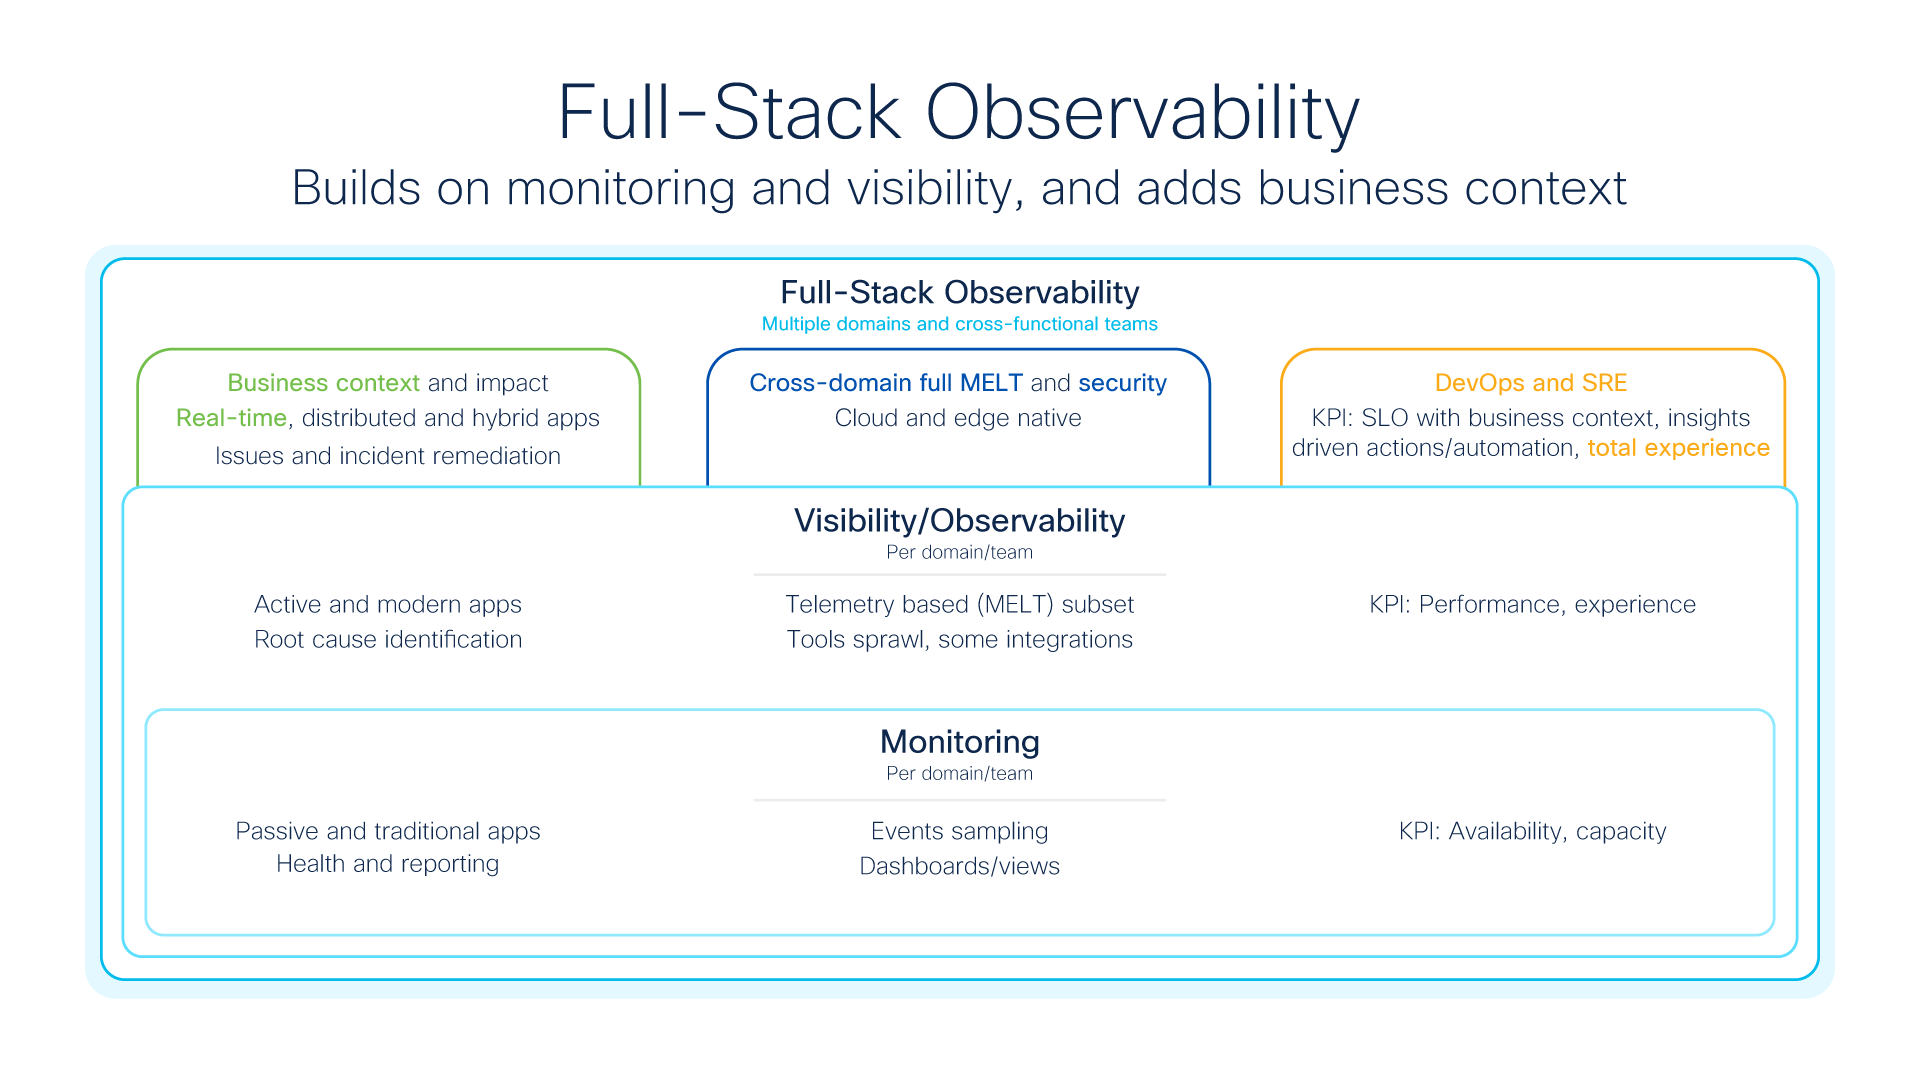 Full-Stack Observability builds on monitoring and visibility, and adds business context.